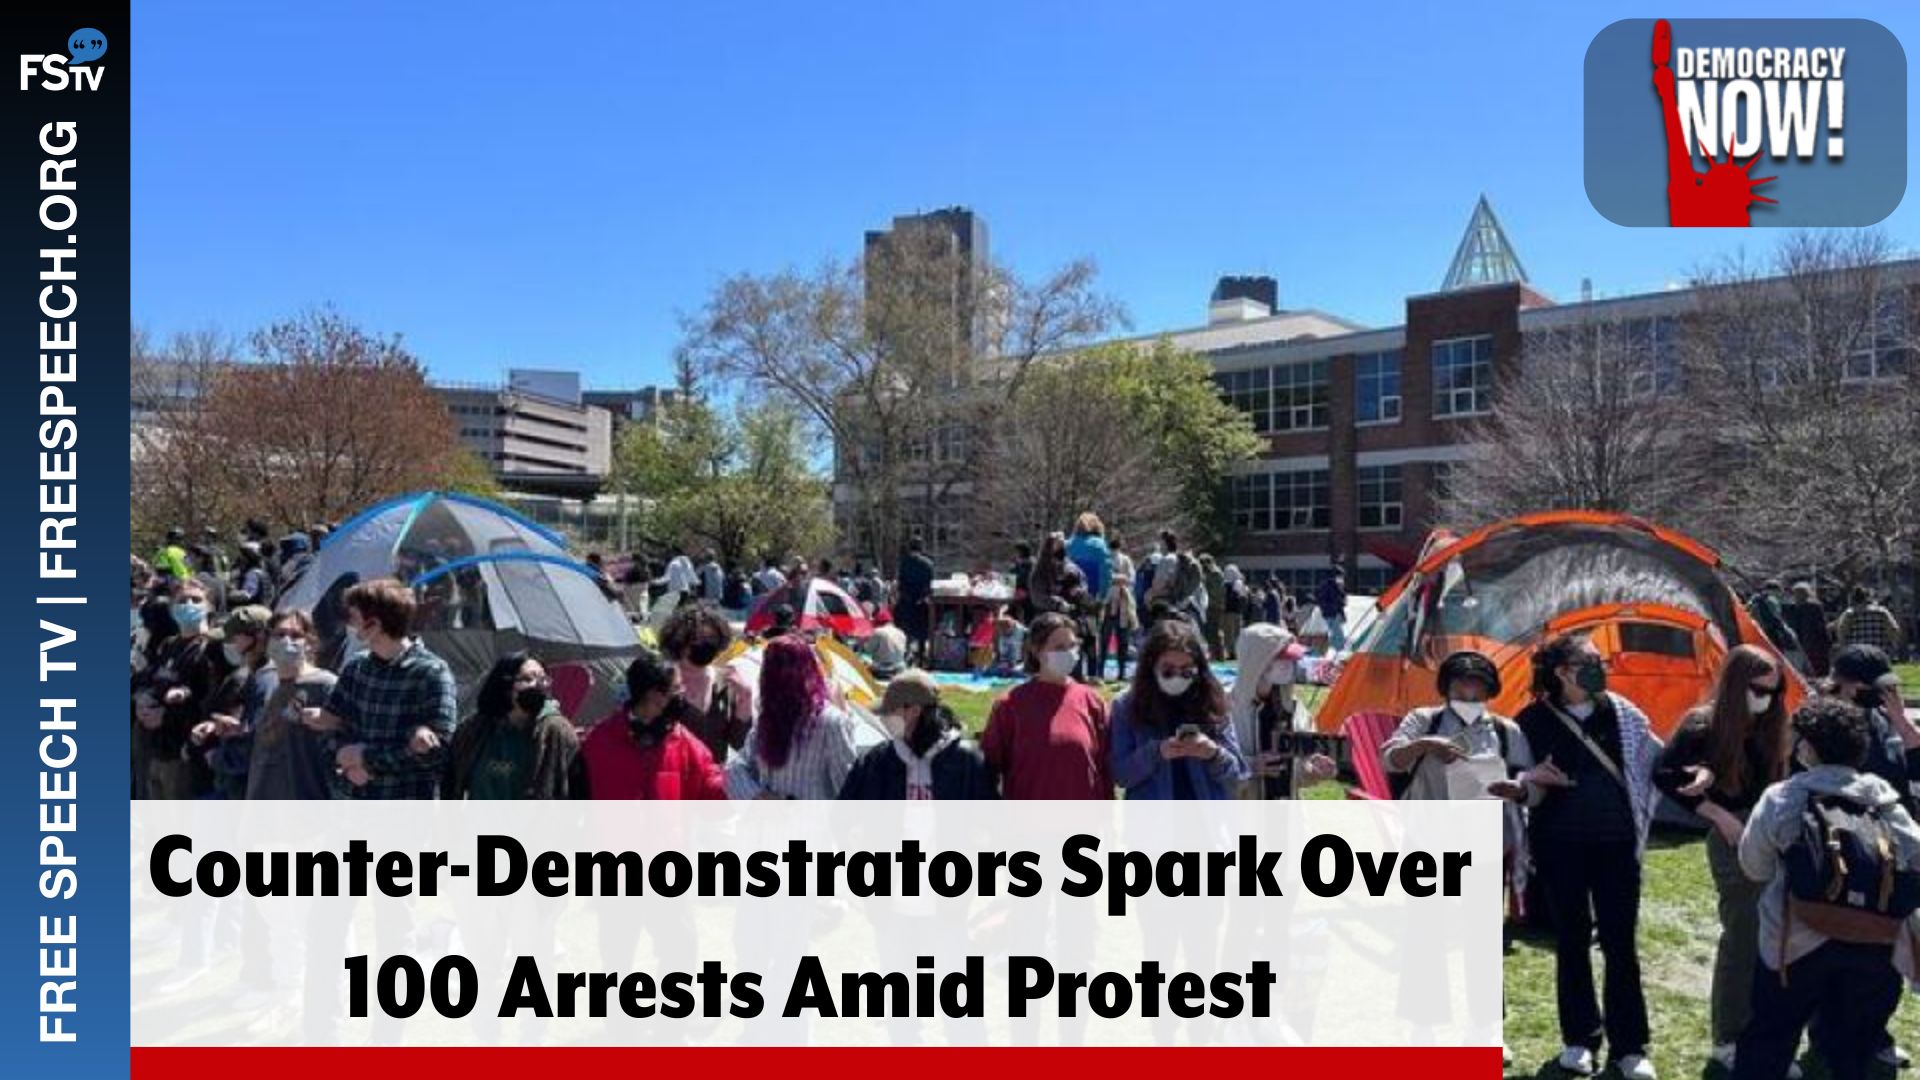 Democracy Now! | Counter-Demonstrators Spark Over 100 Arrests Amid Protest